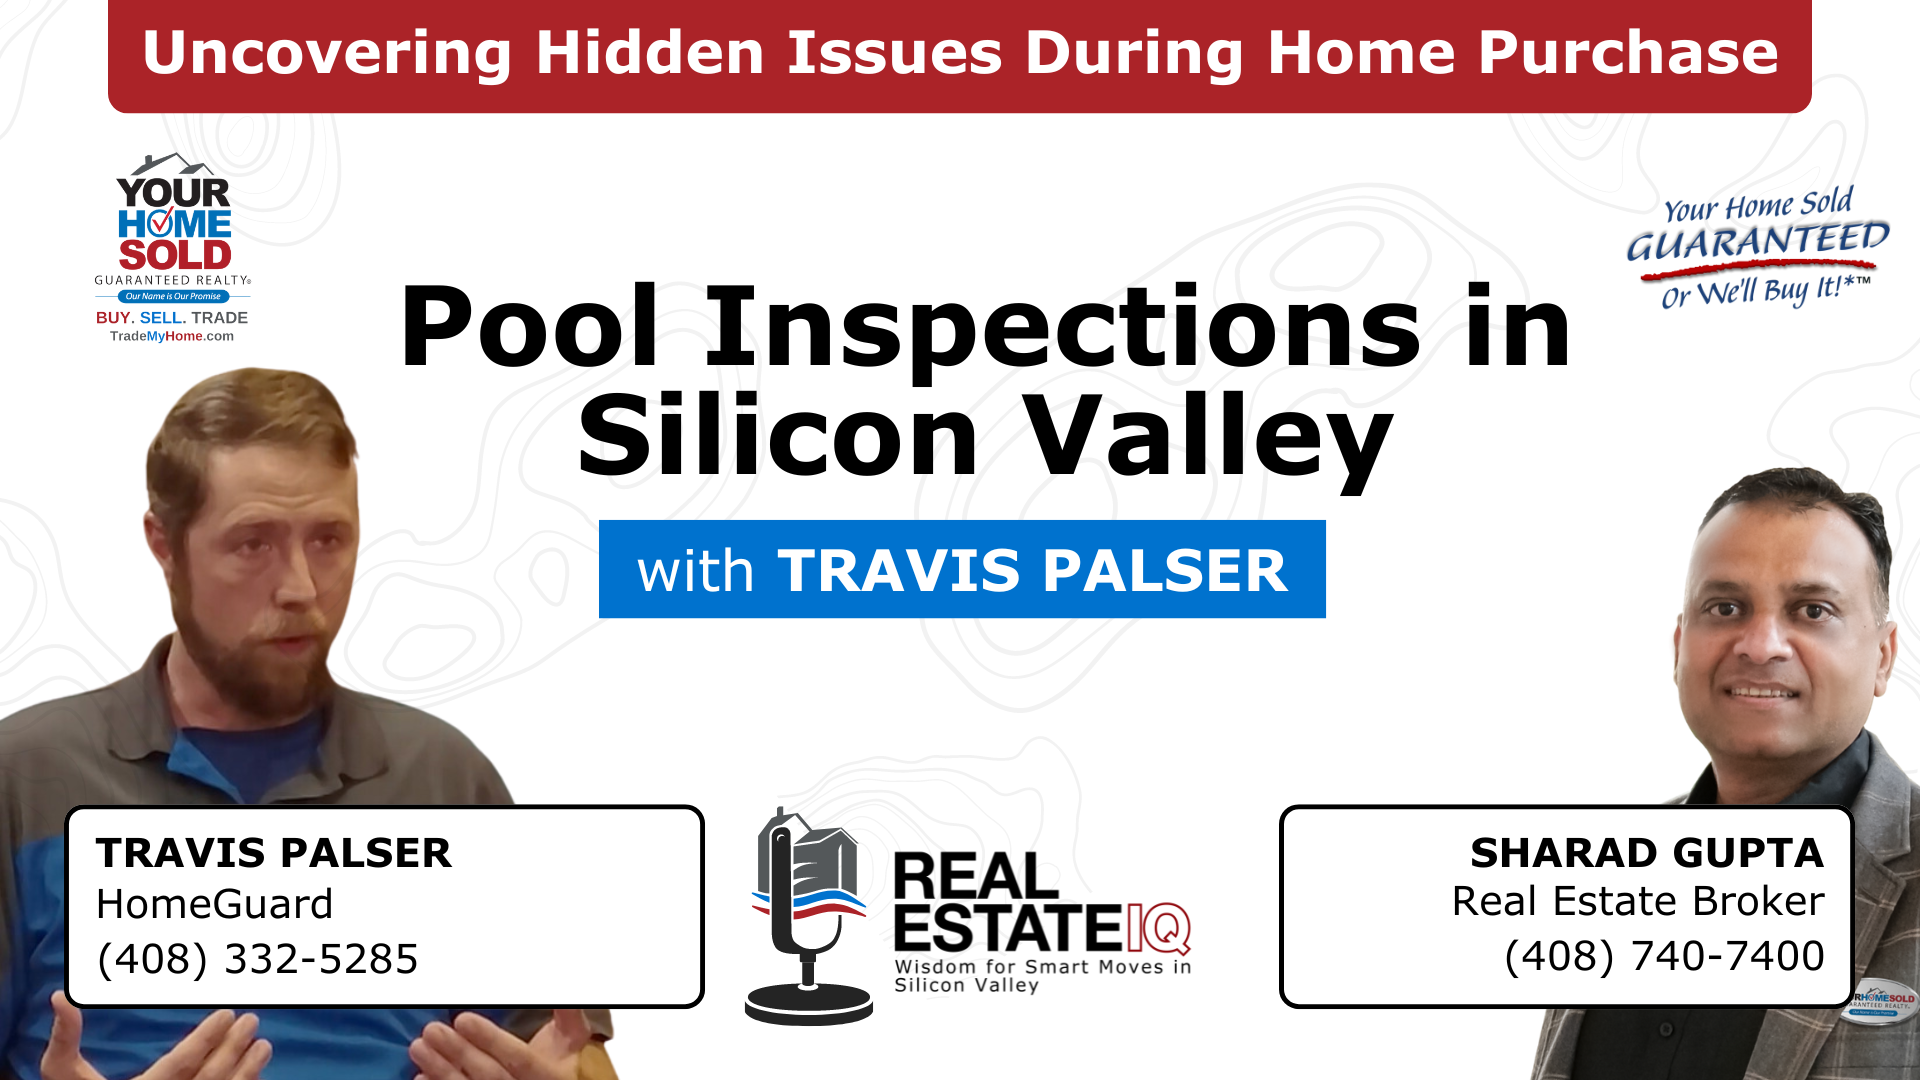 Pool Inspections: Uncovering Hidden Issues During Home Purchase in Silicon Valley